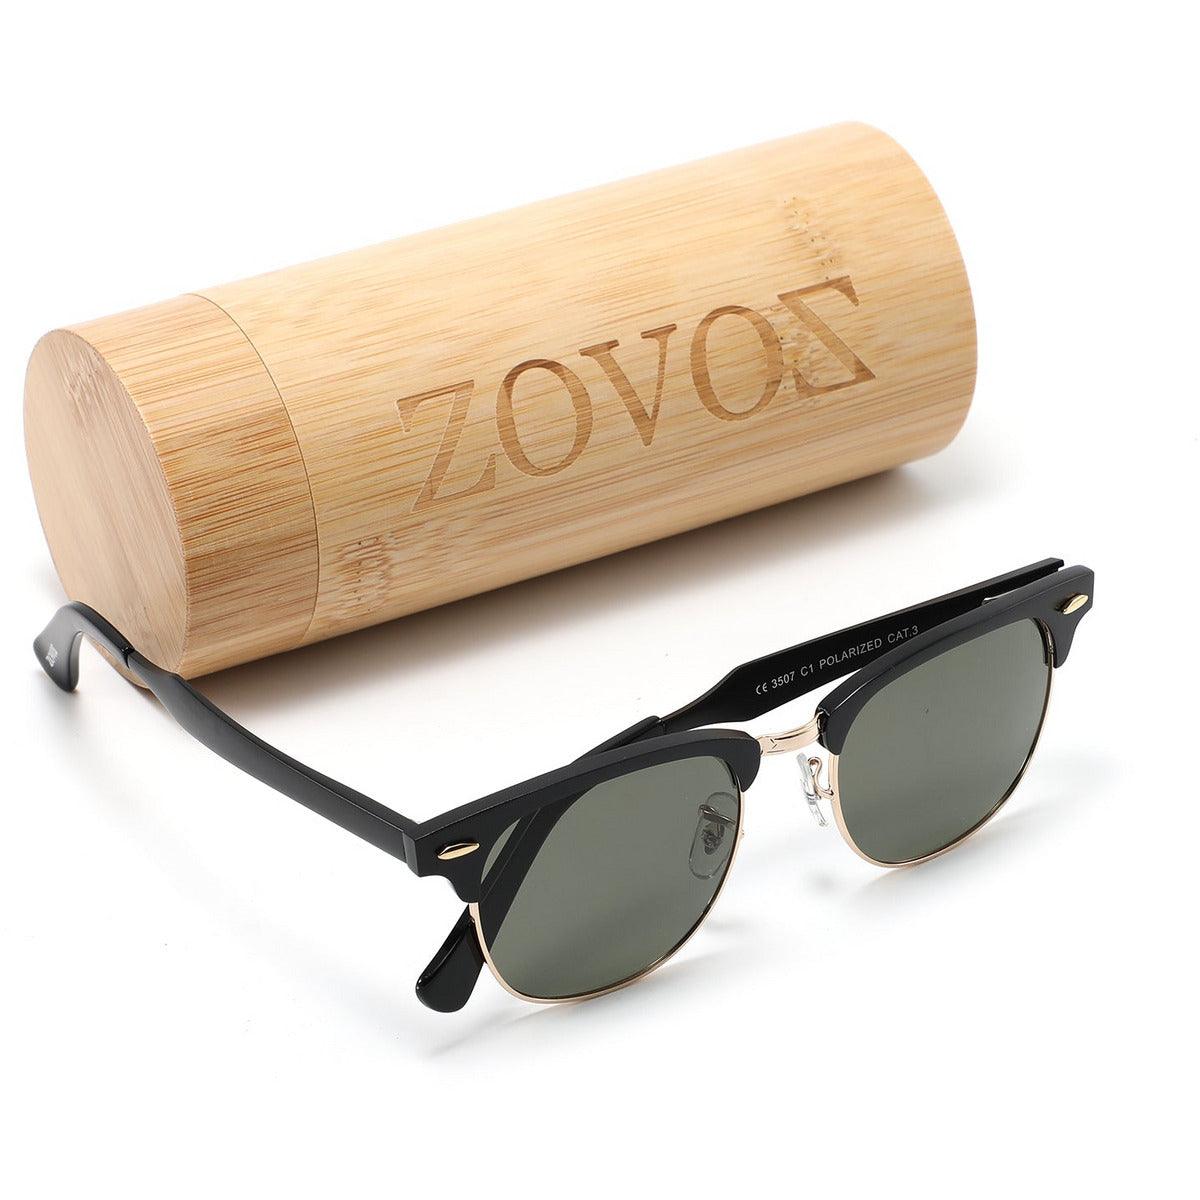 ZOVOZ Sonnenbrille Nike im Outlet Sale